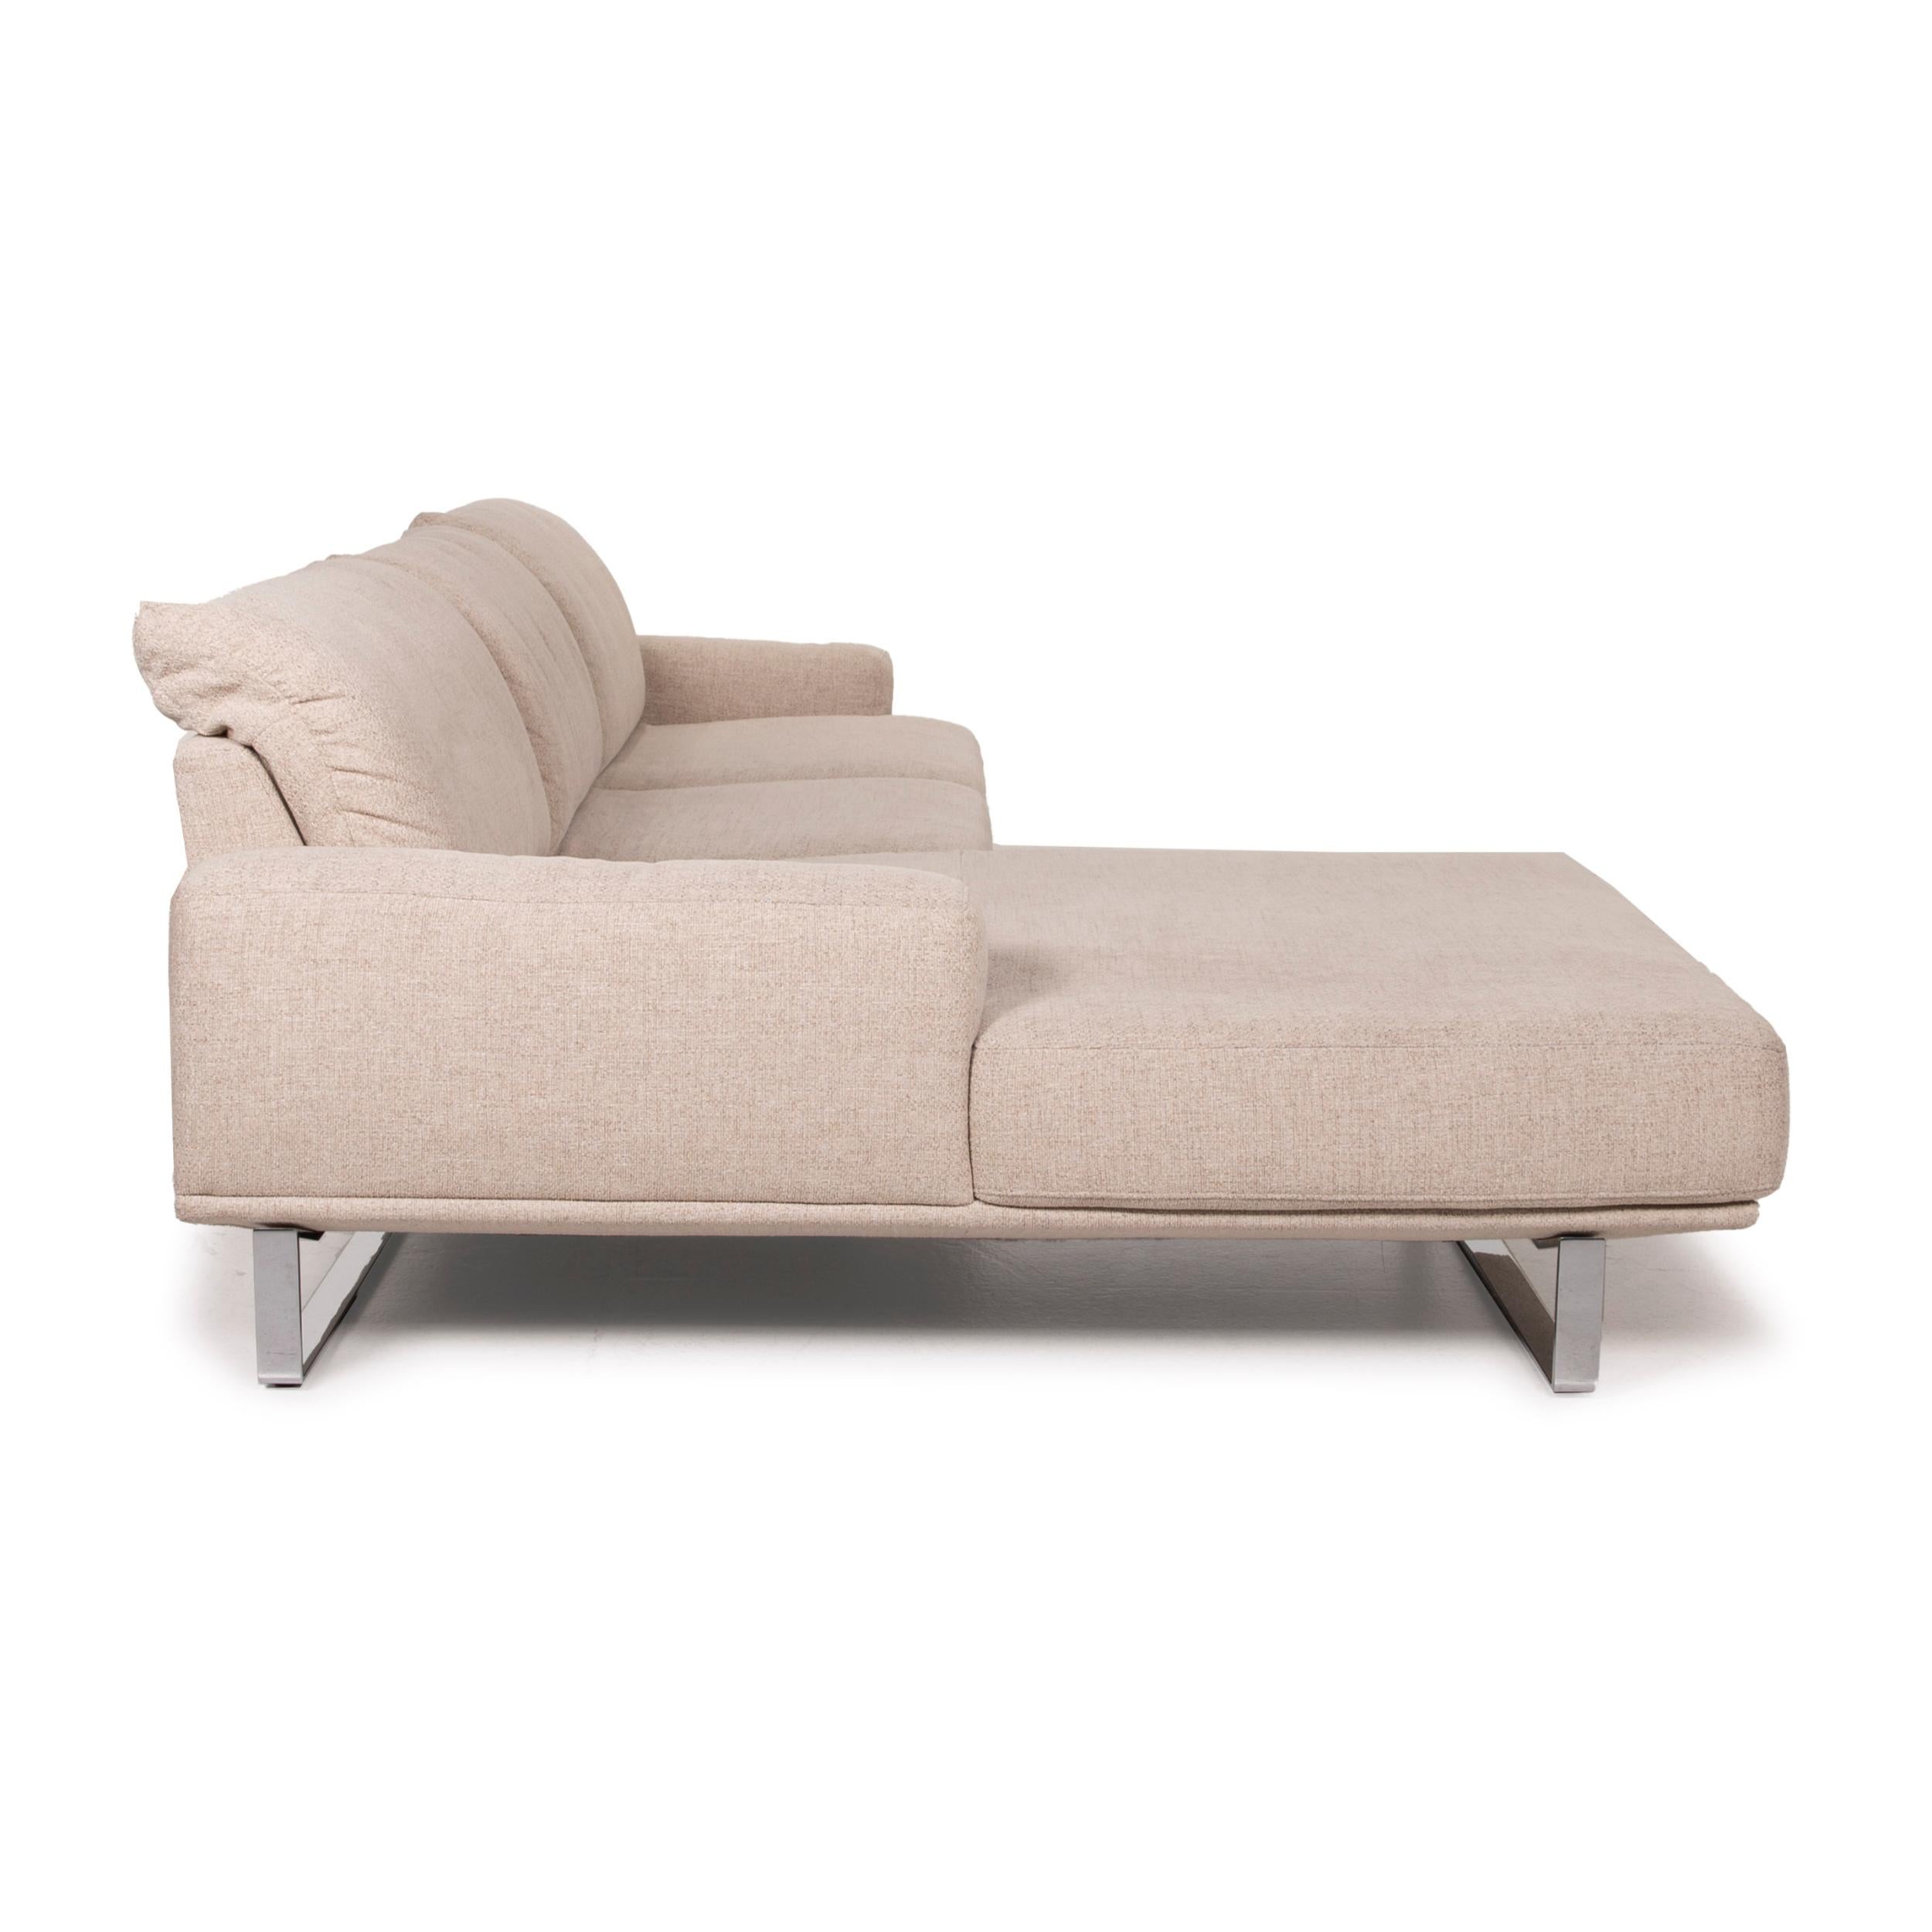 Dieter Knoll Collection Lesina Fabric Sofa Cream Corner Sofa Electrical Function 4